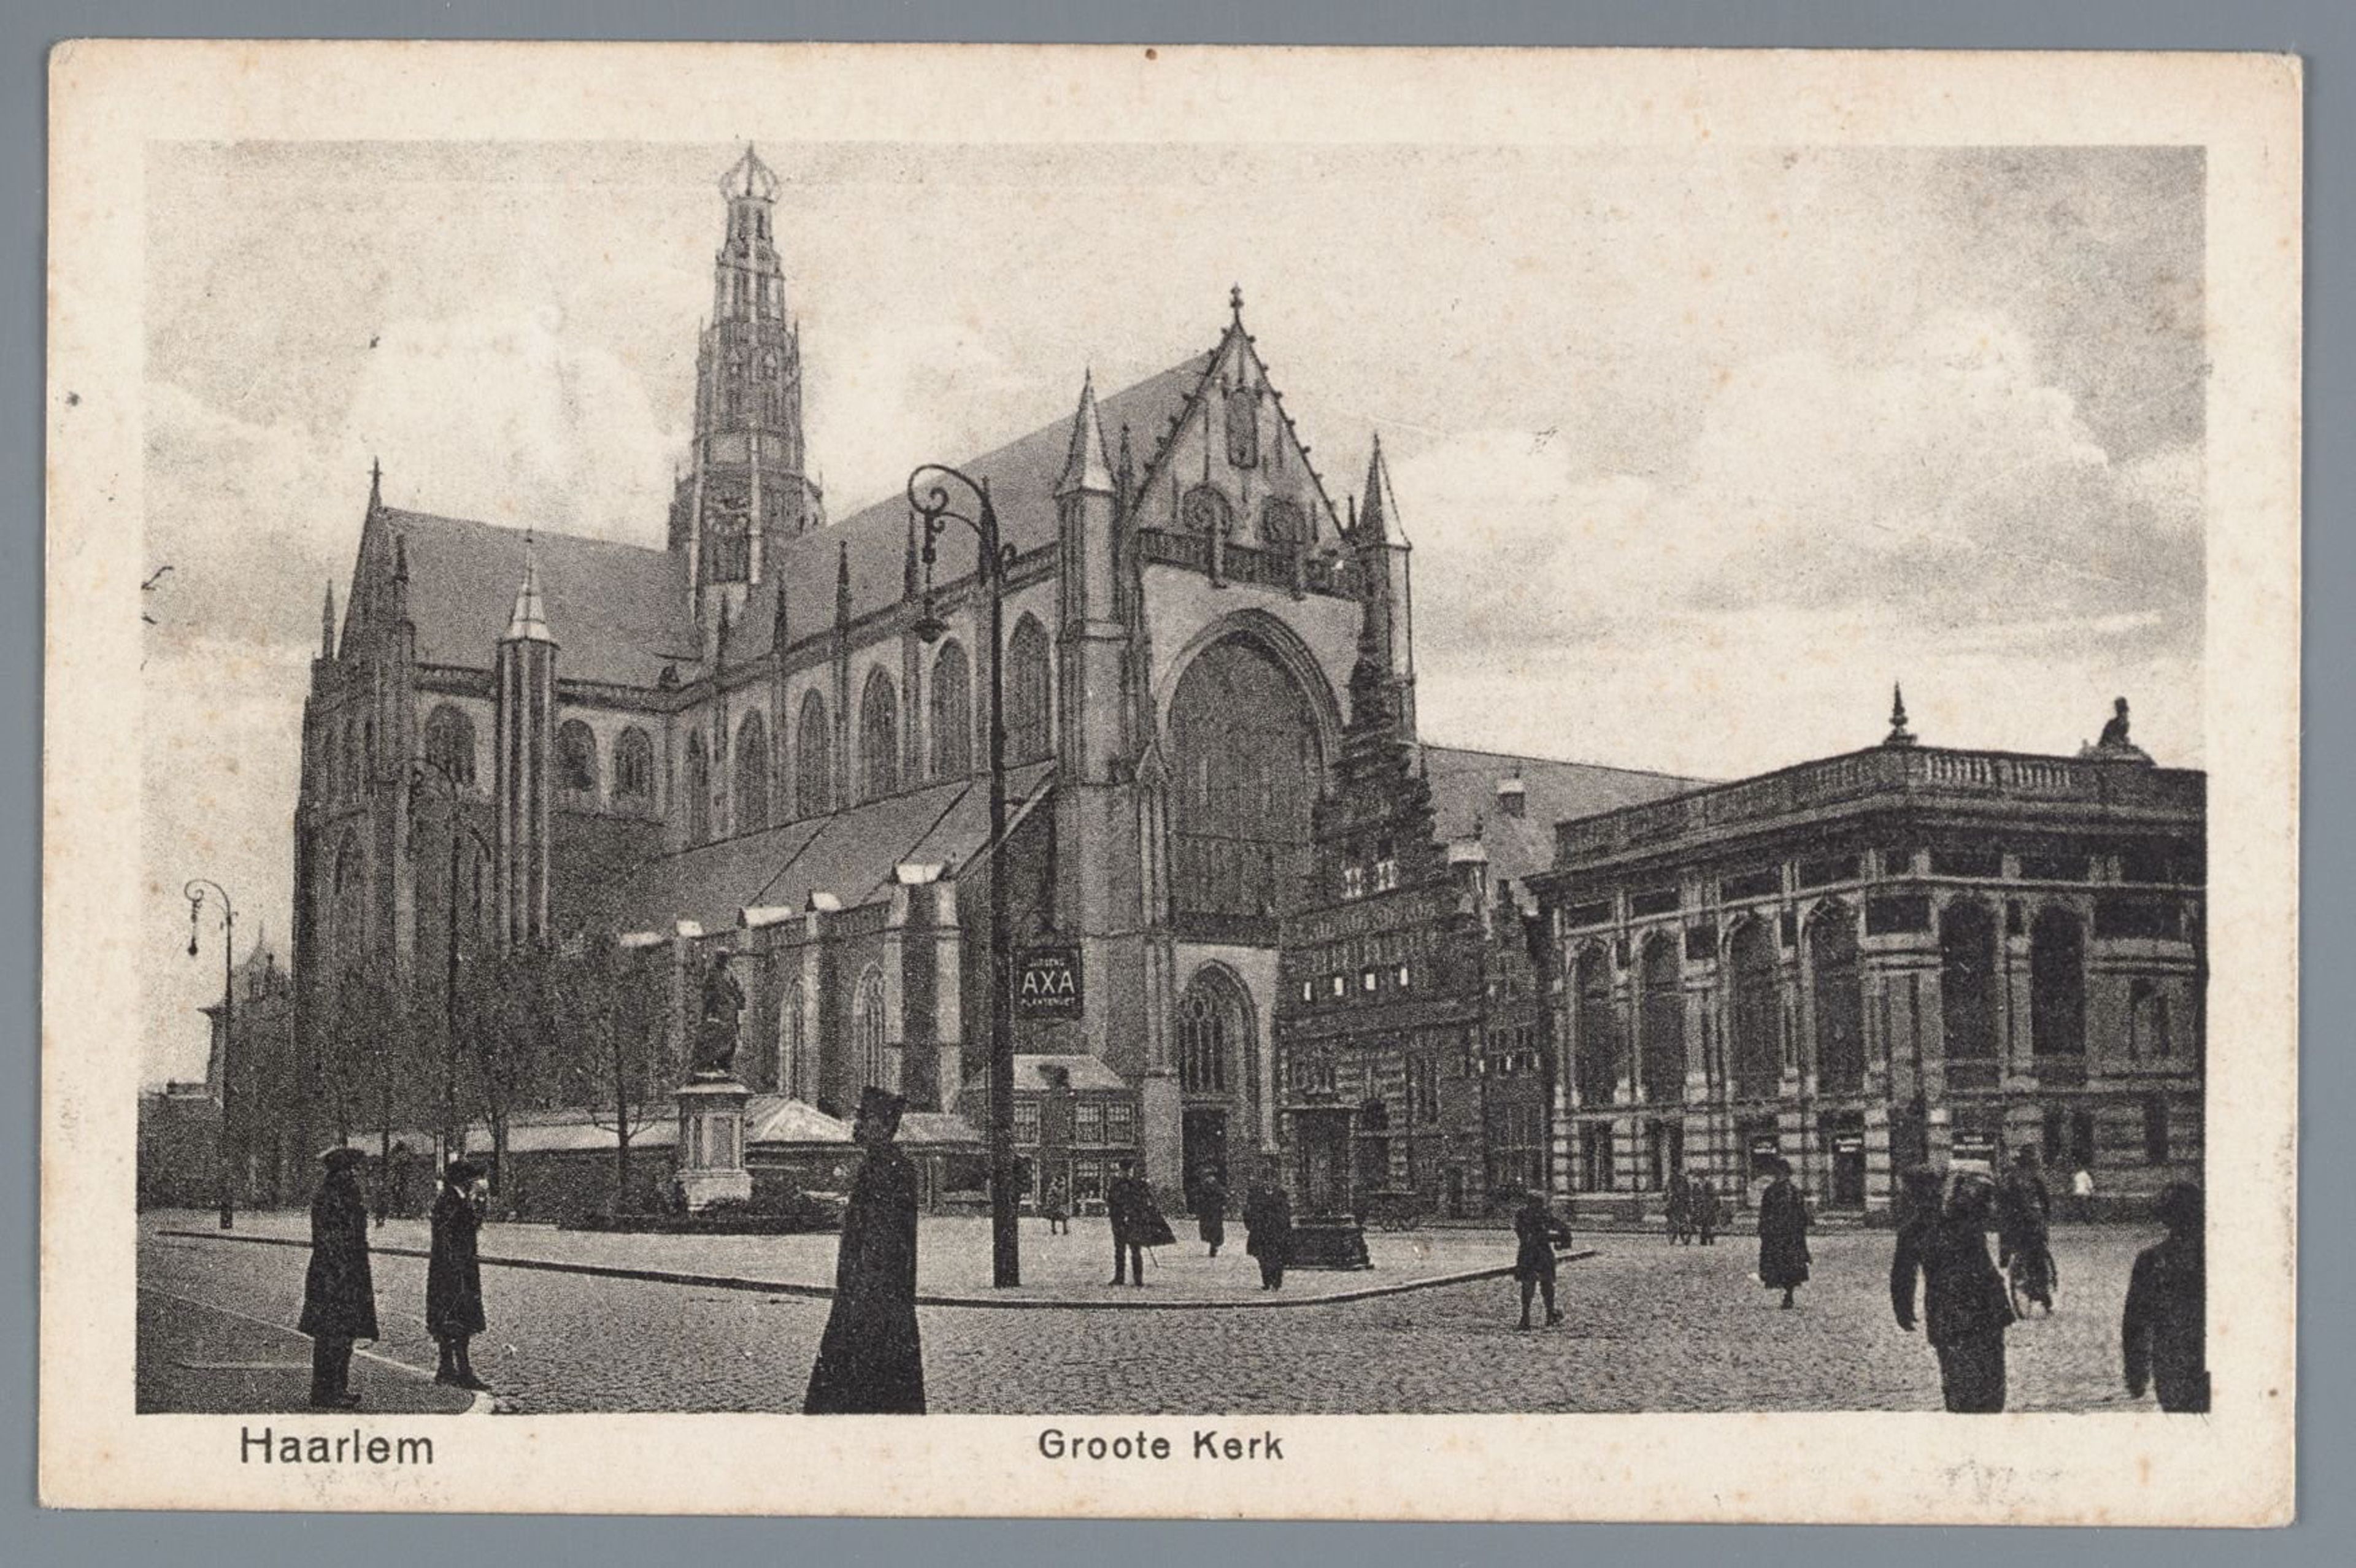 Grote Kerk on the Grote Markt in Haarlem, photograph from the Noord-Hollands Archief (North Holland Archive) 